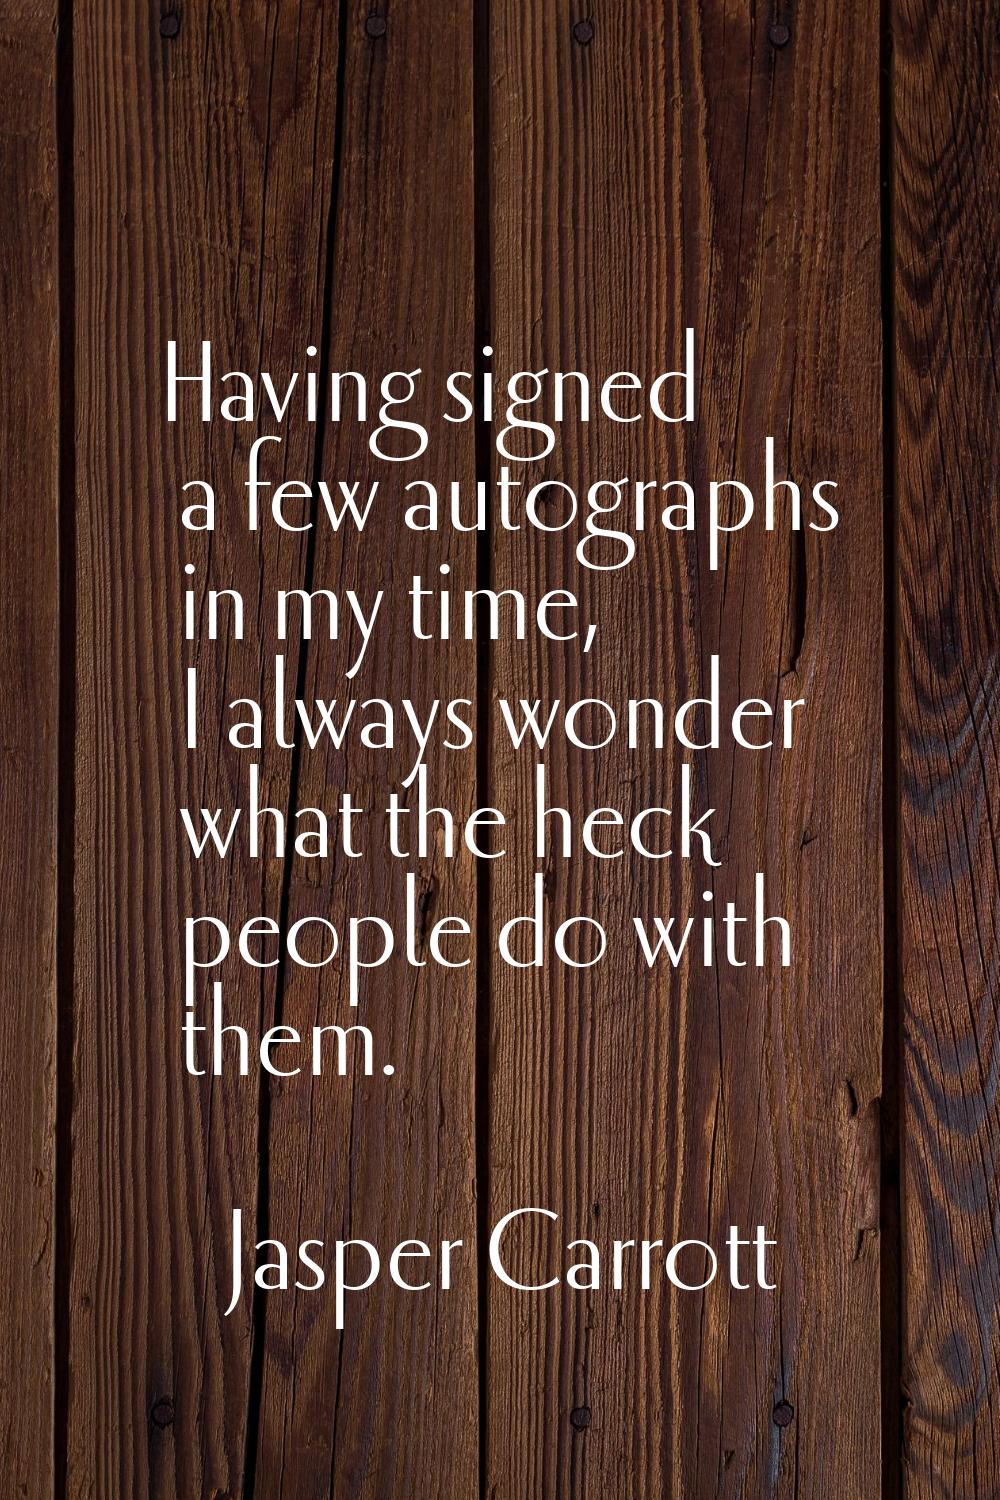 Having signed a few autographs in my time, I always wonder what the heck people do with them.